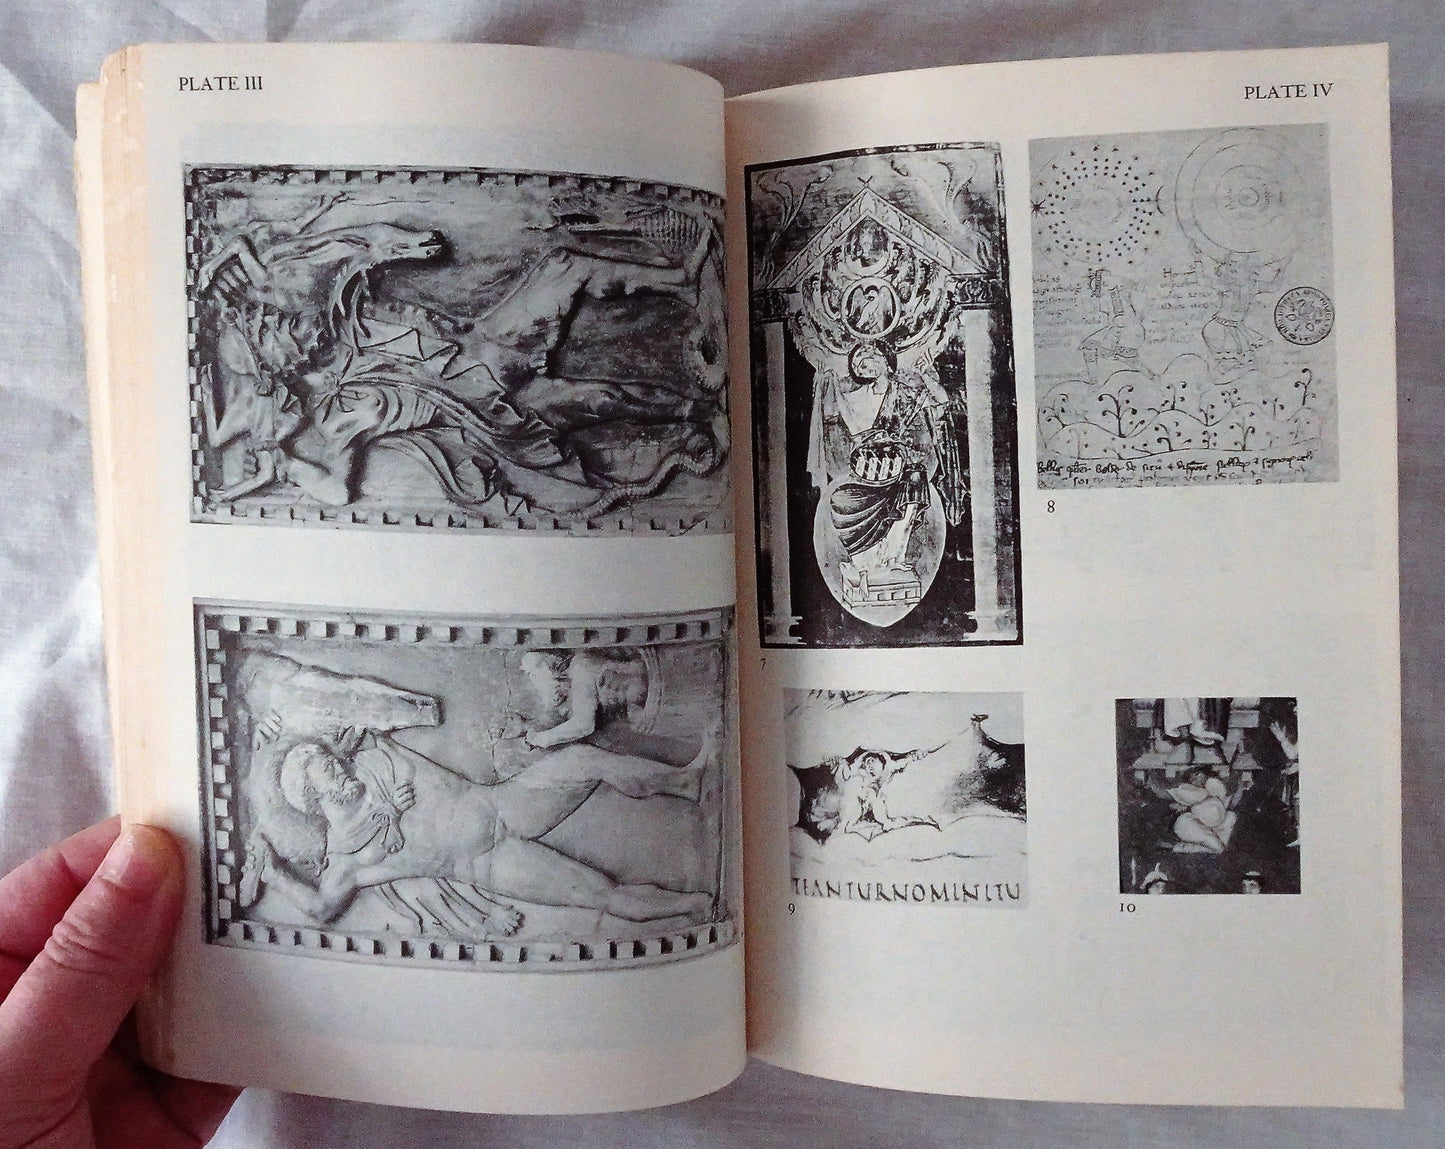 Studies in Iconology by Erwin Panofsky